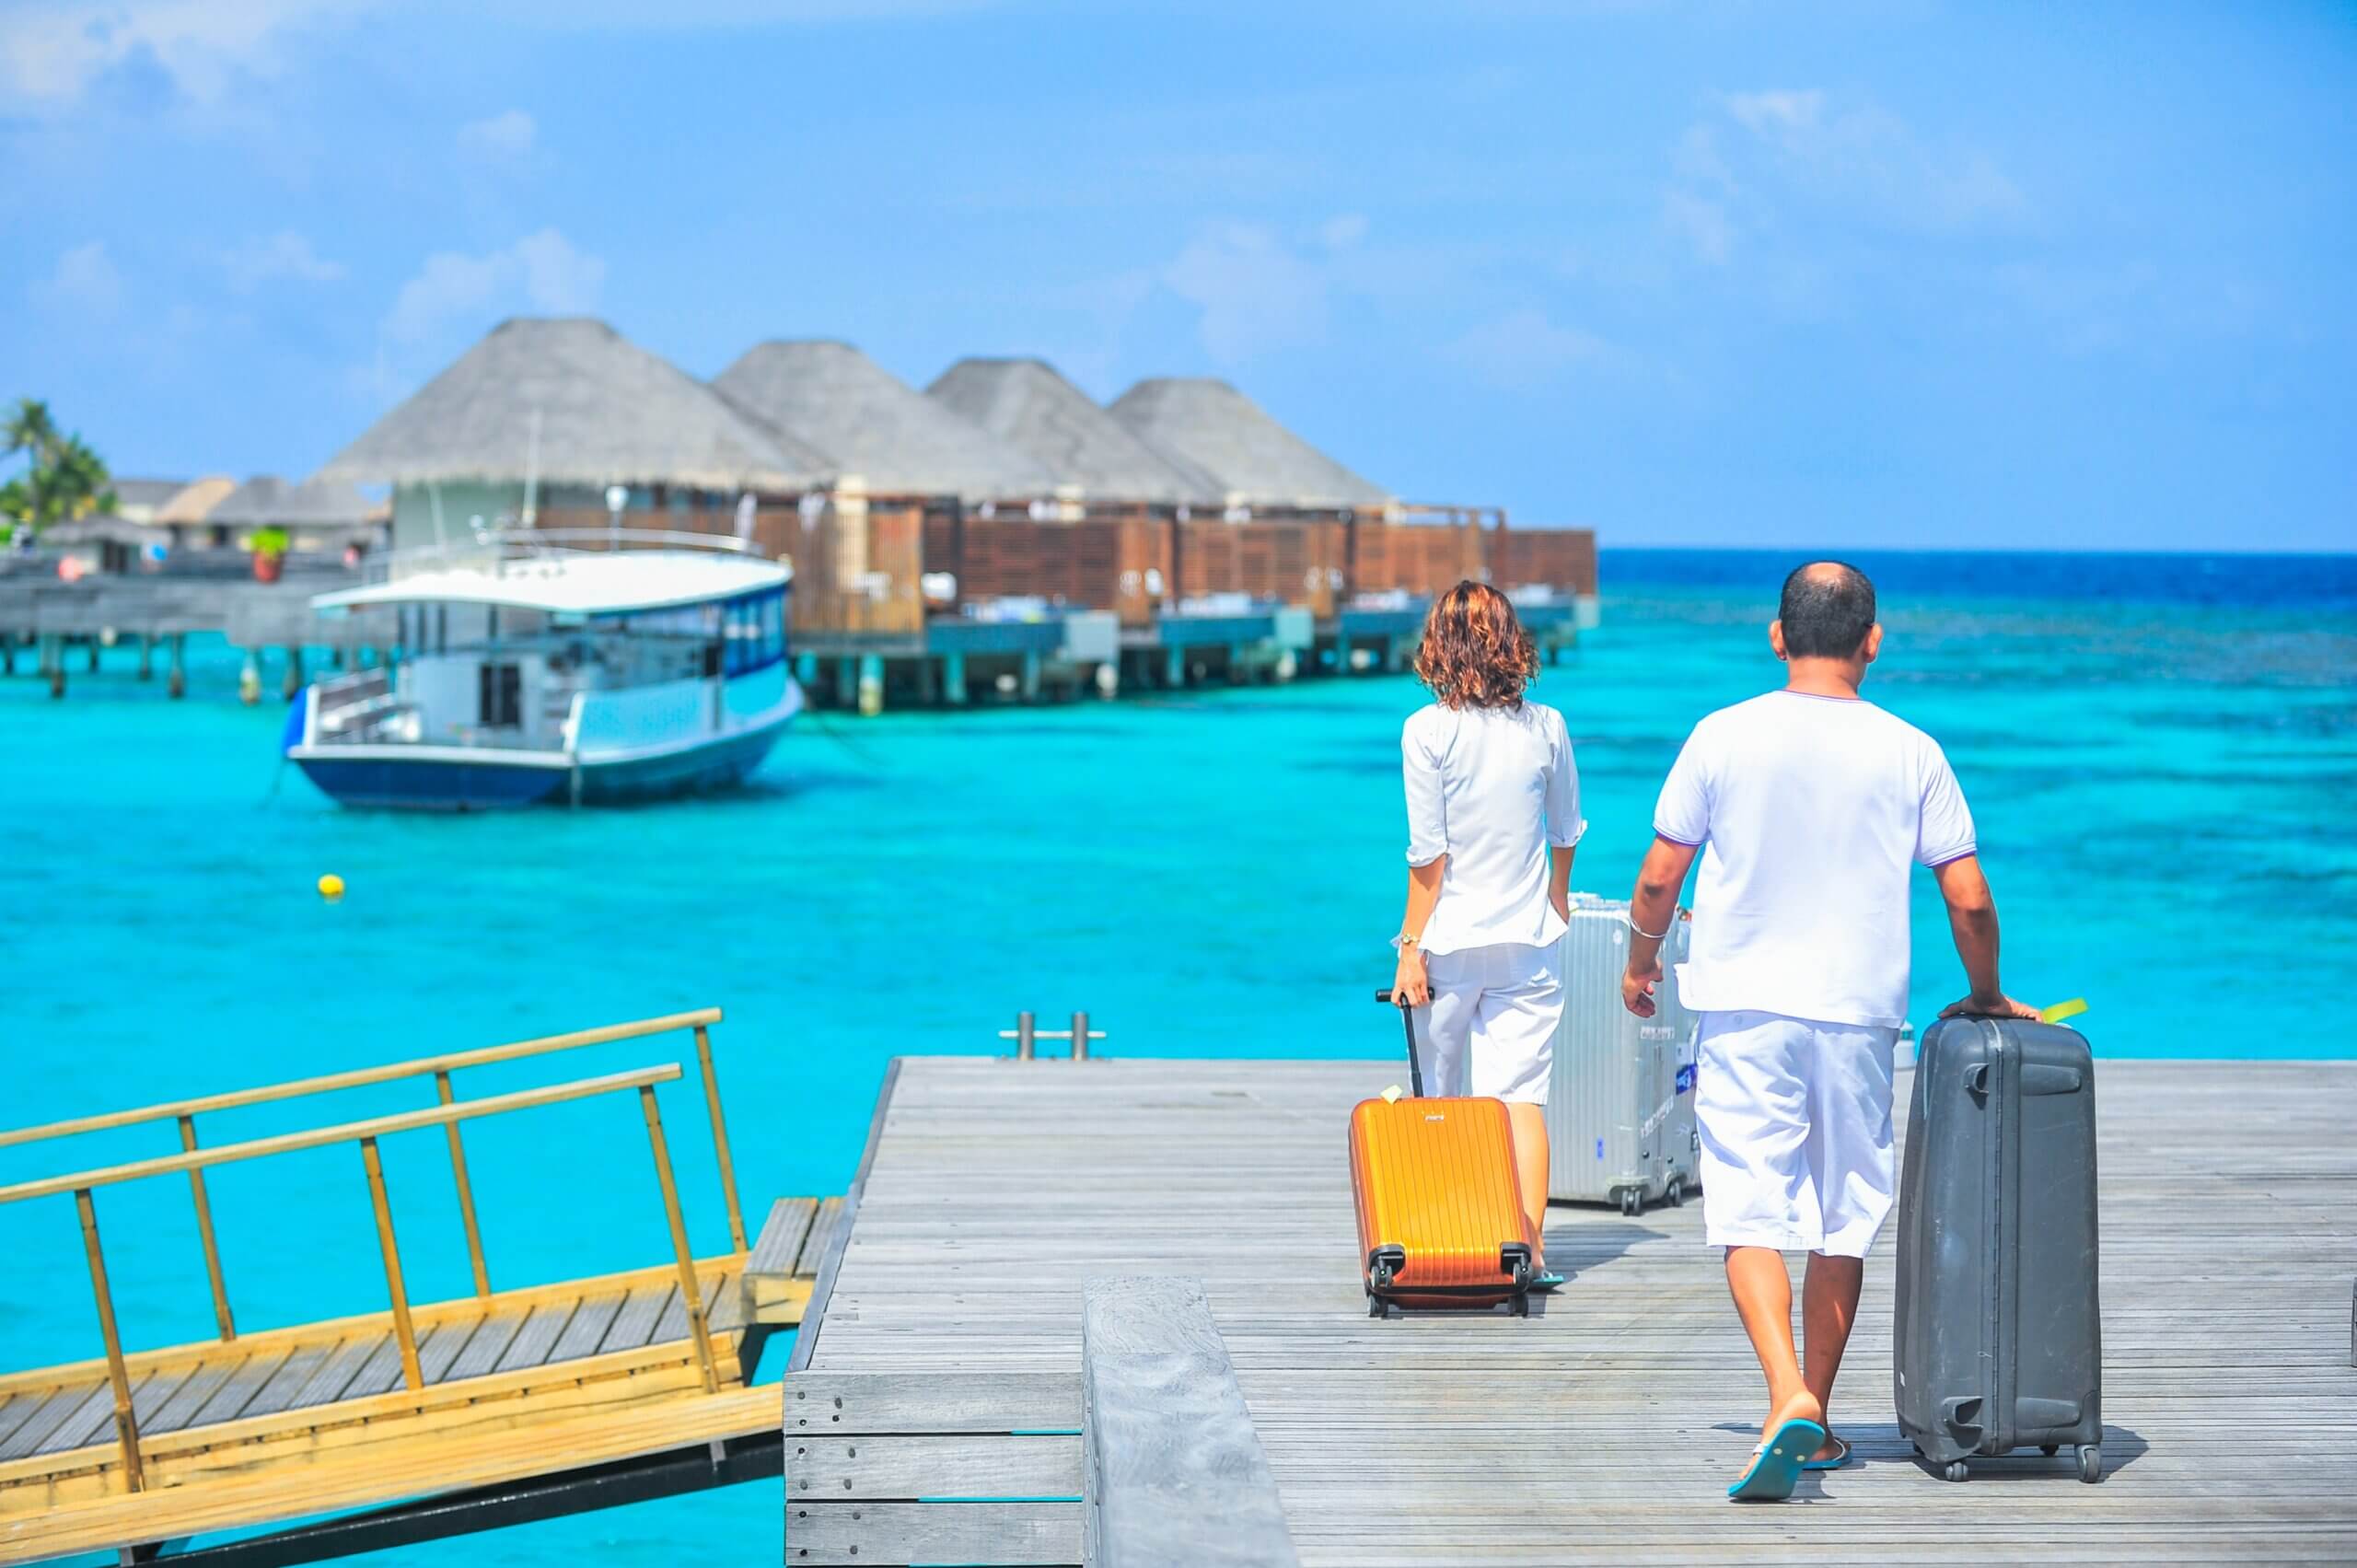 Man and woman walk with their luggage on a luxury hotel's dock.